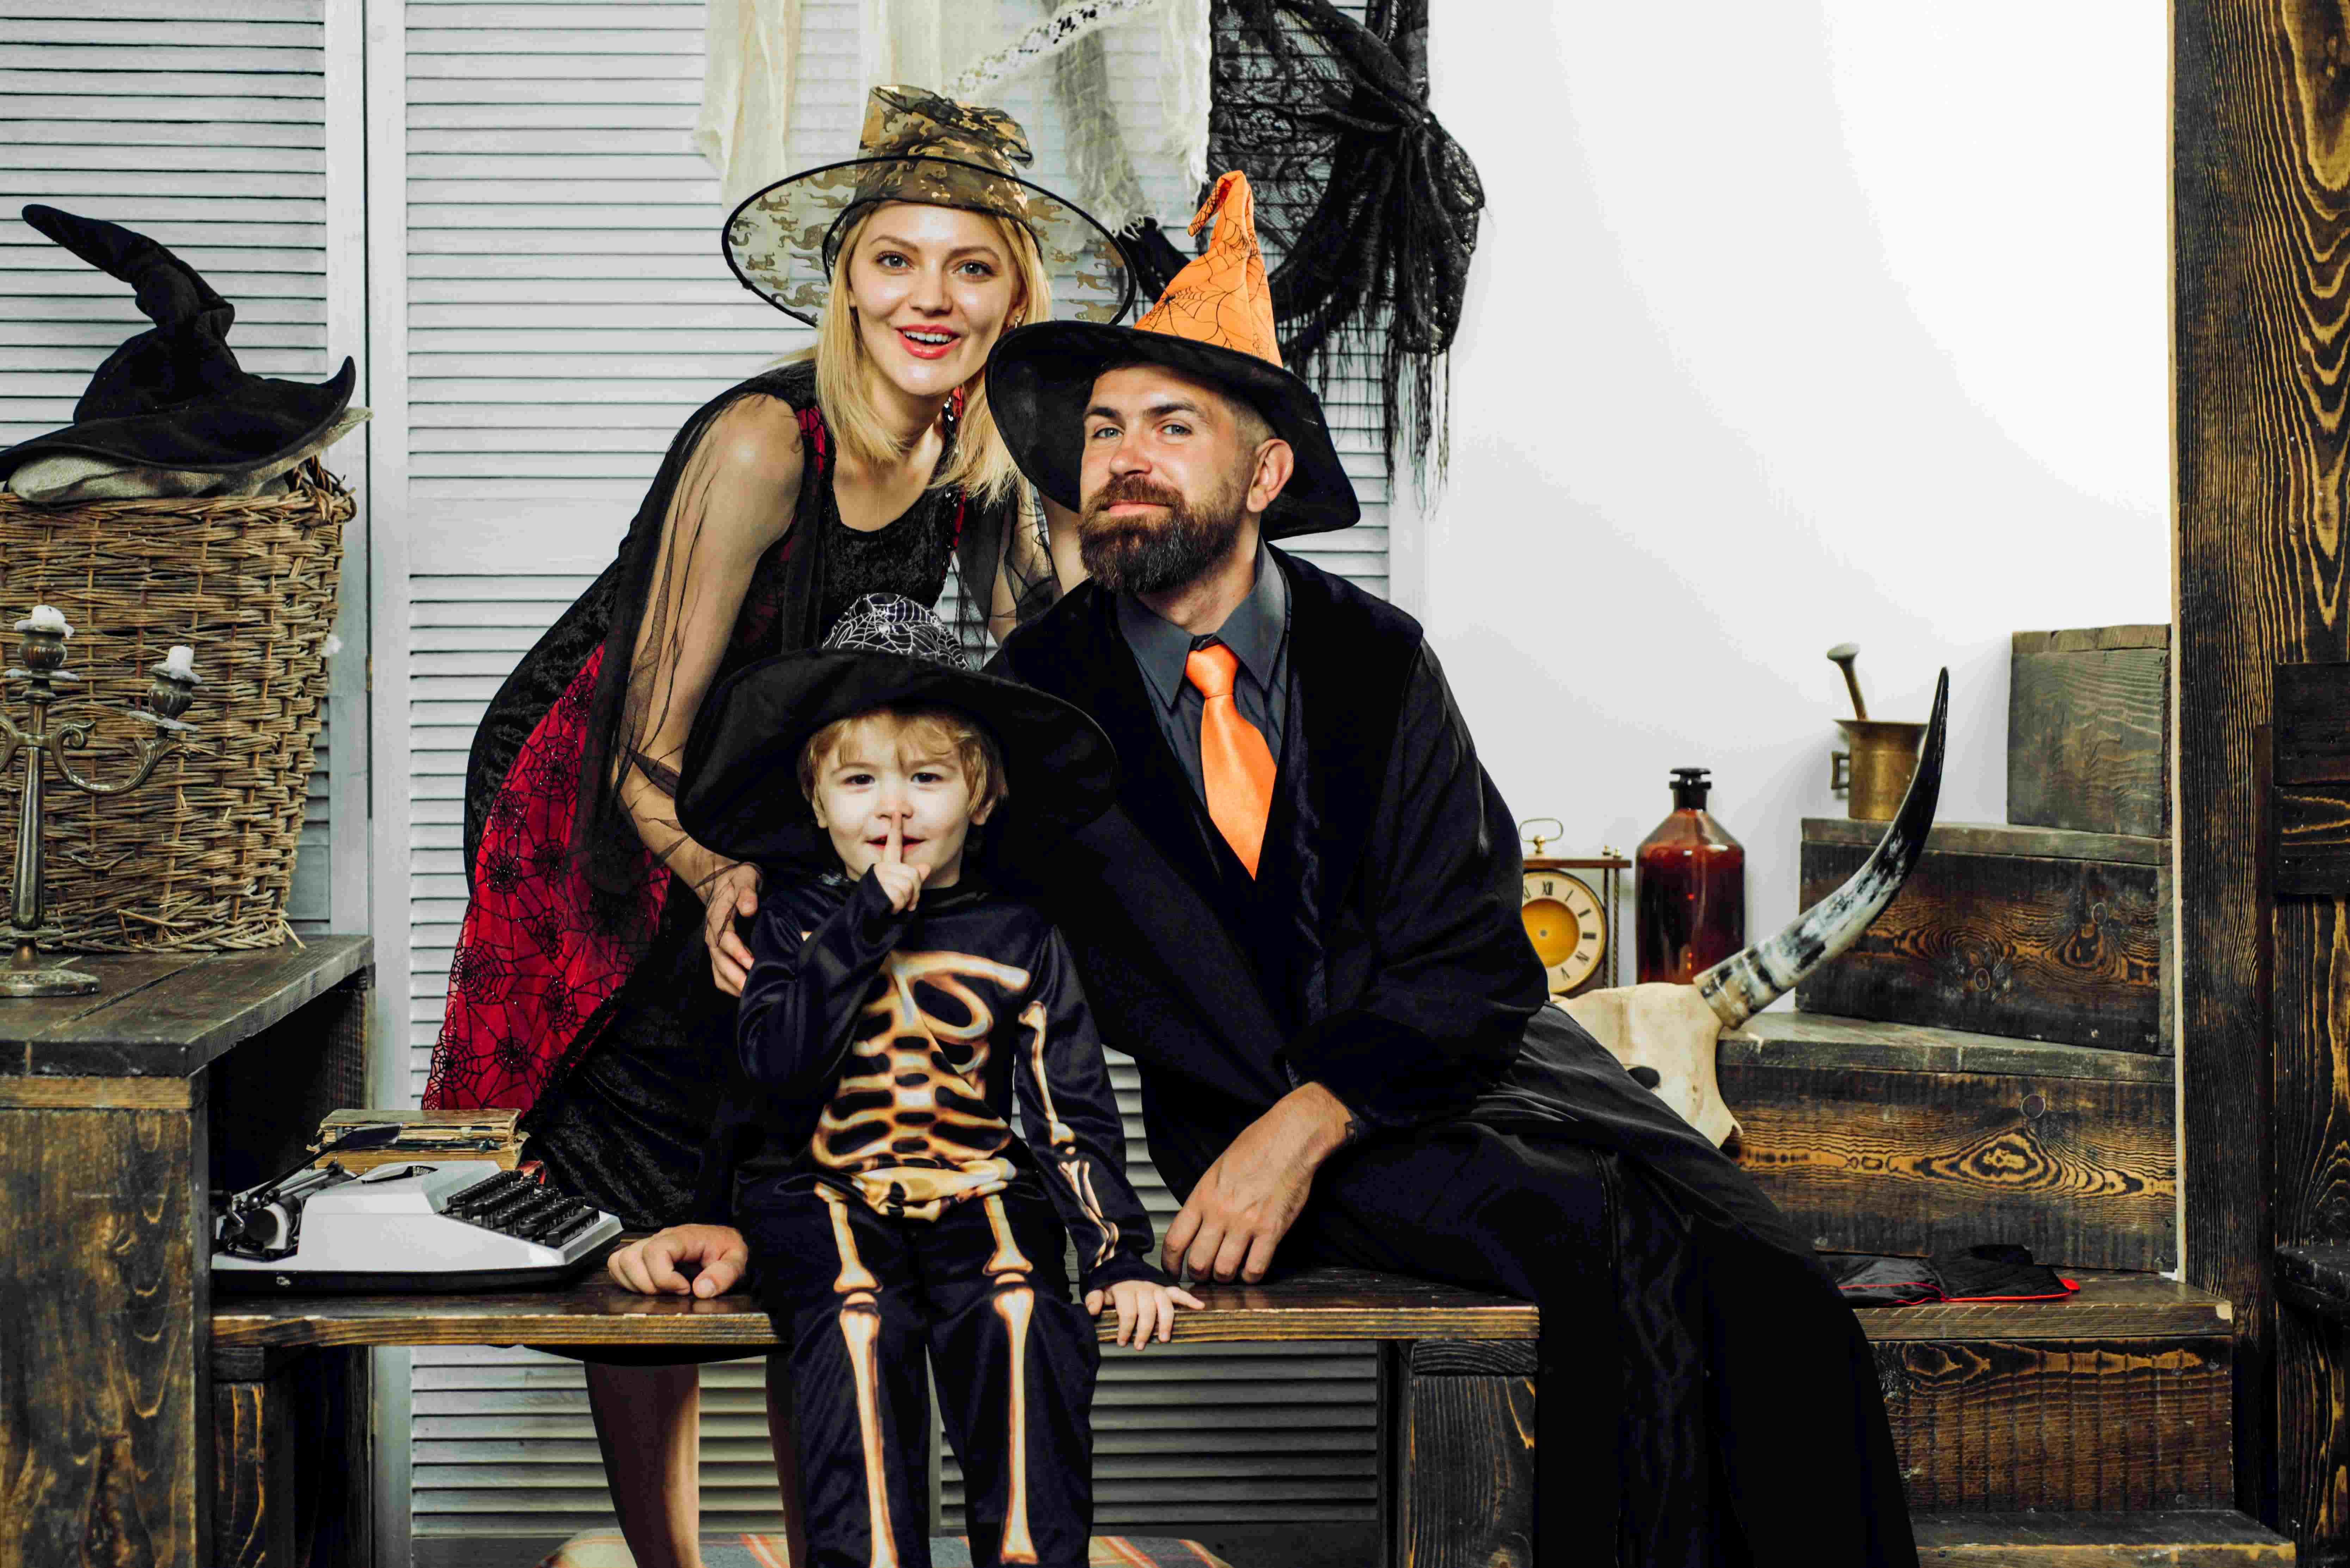 5 Easy and Fun Family Costume Ideas for Halloween